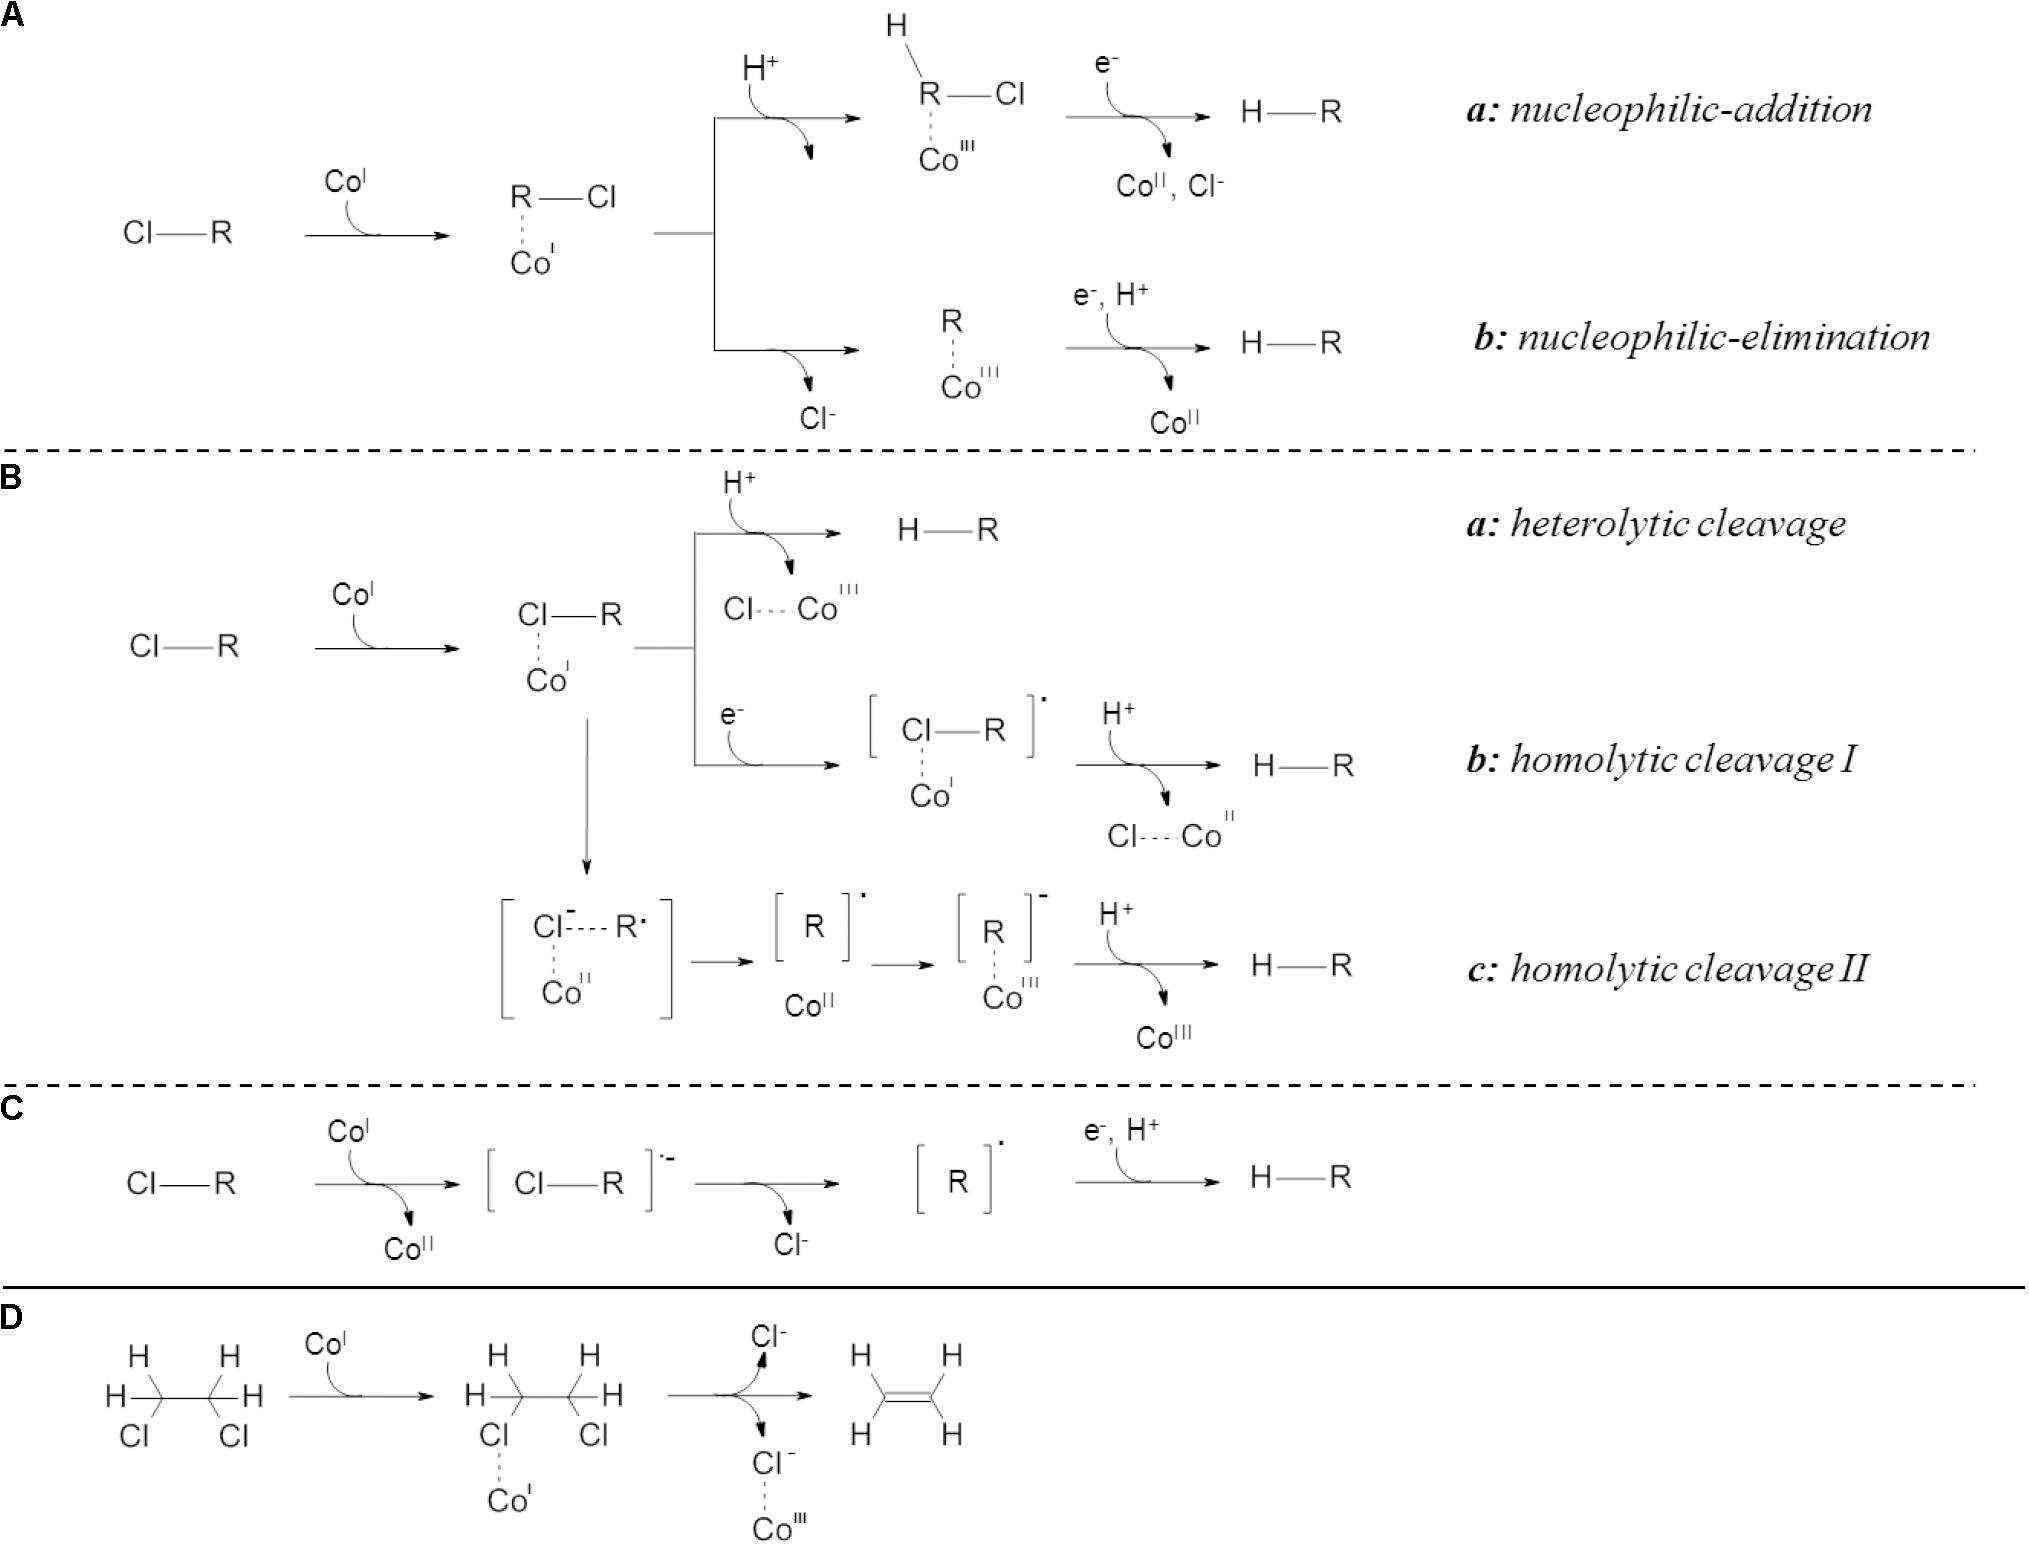 Frontiers Dual Element C Cl Isotope Analysis Indicates Distinct Mechanisms Of Reductive Dehalogenation Of Chlorinated Ethenes And Dichloroethane In Dehalococcoides Mccartyi Strain Btf08 With Defined Reductive Dehalogenase Inventories Microbiology